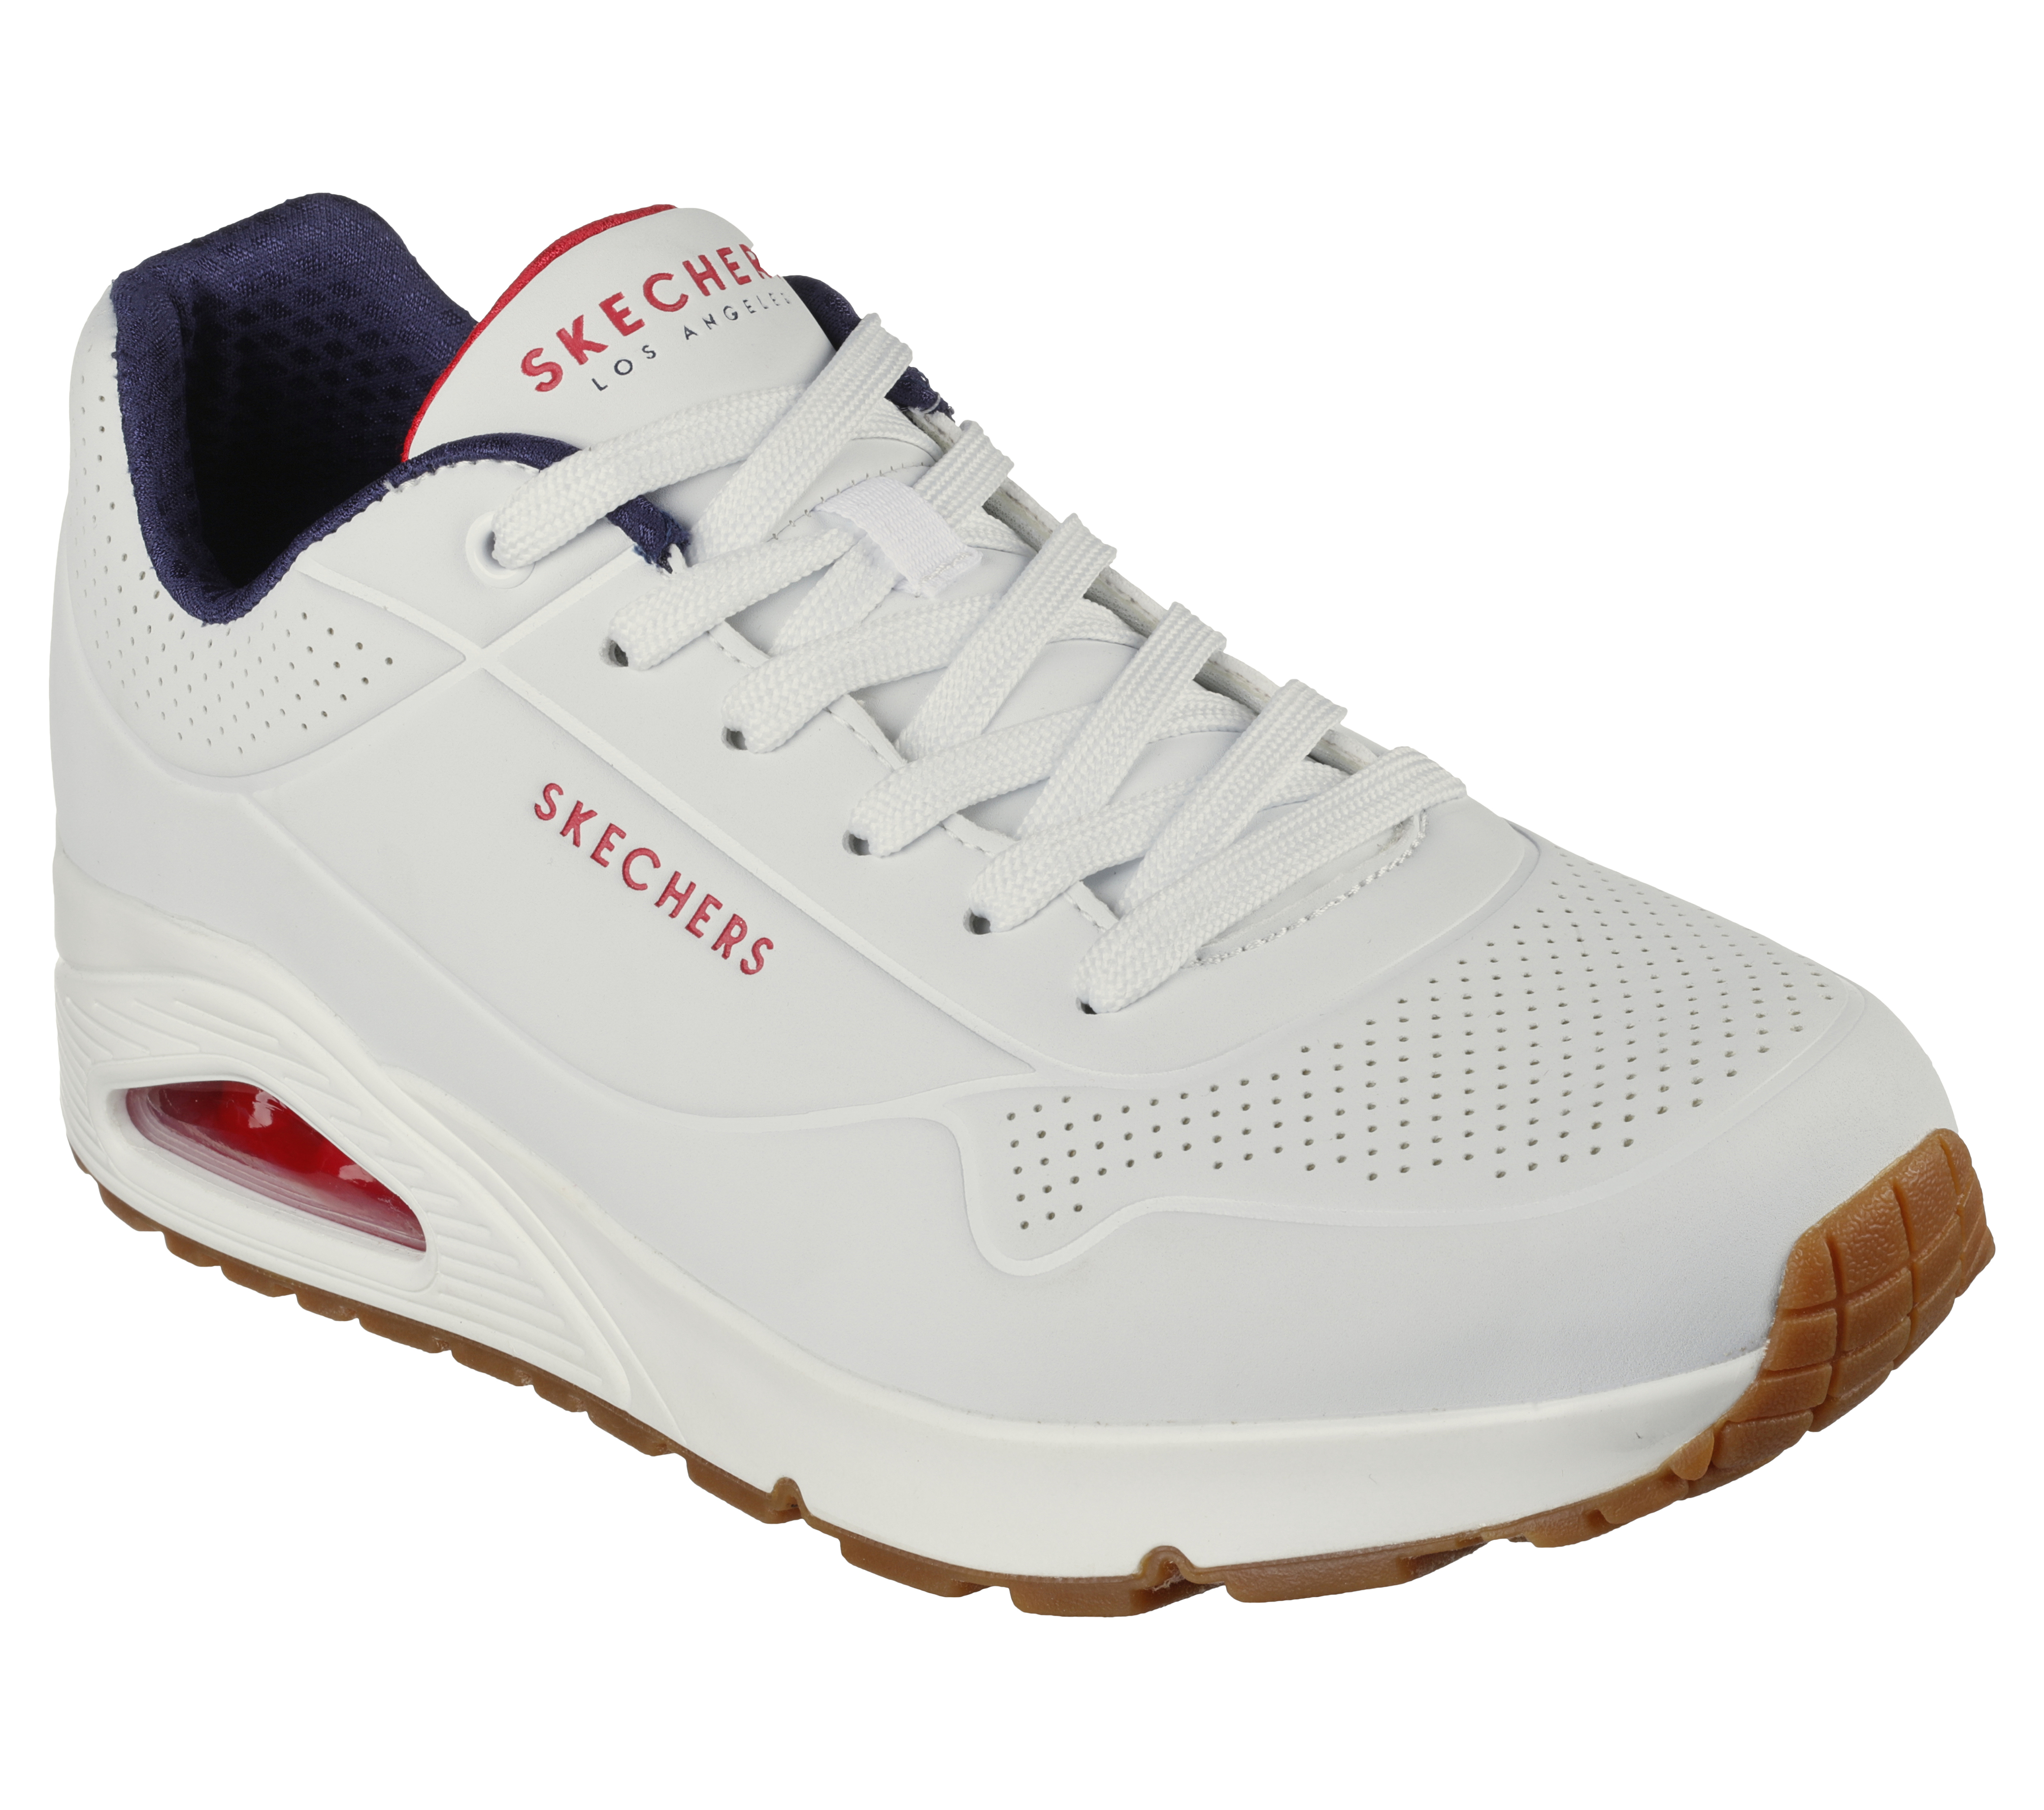 skechers highlights tennis shoes